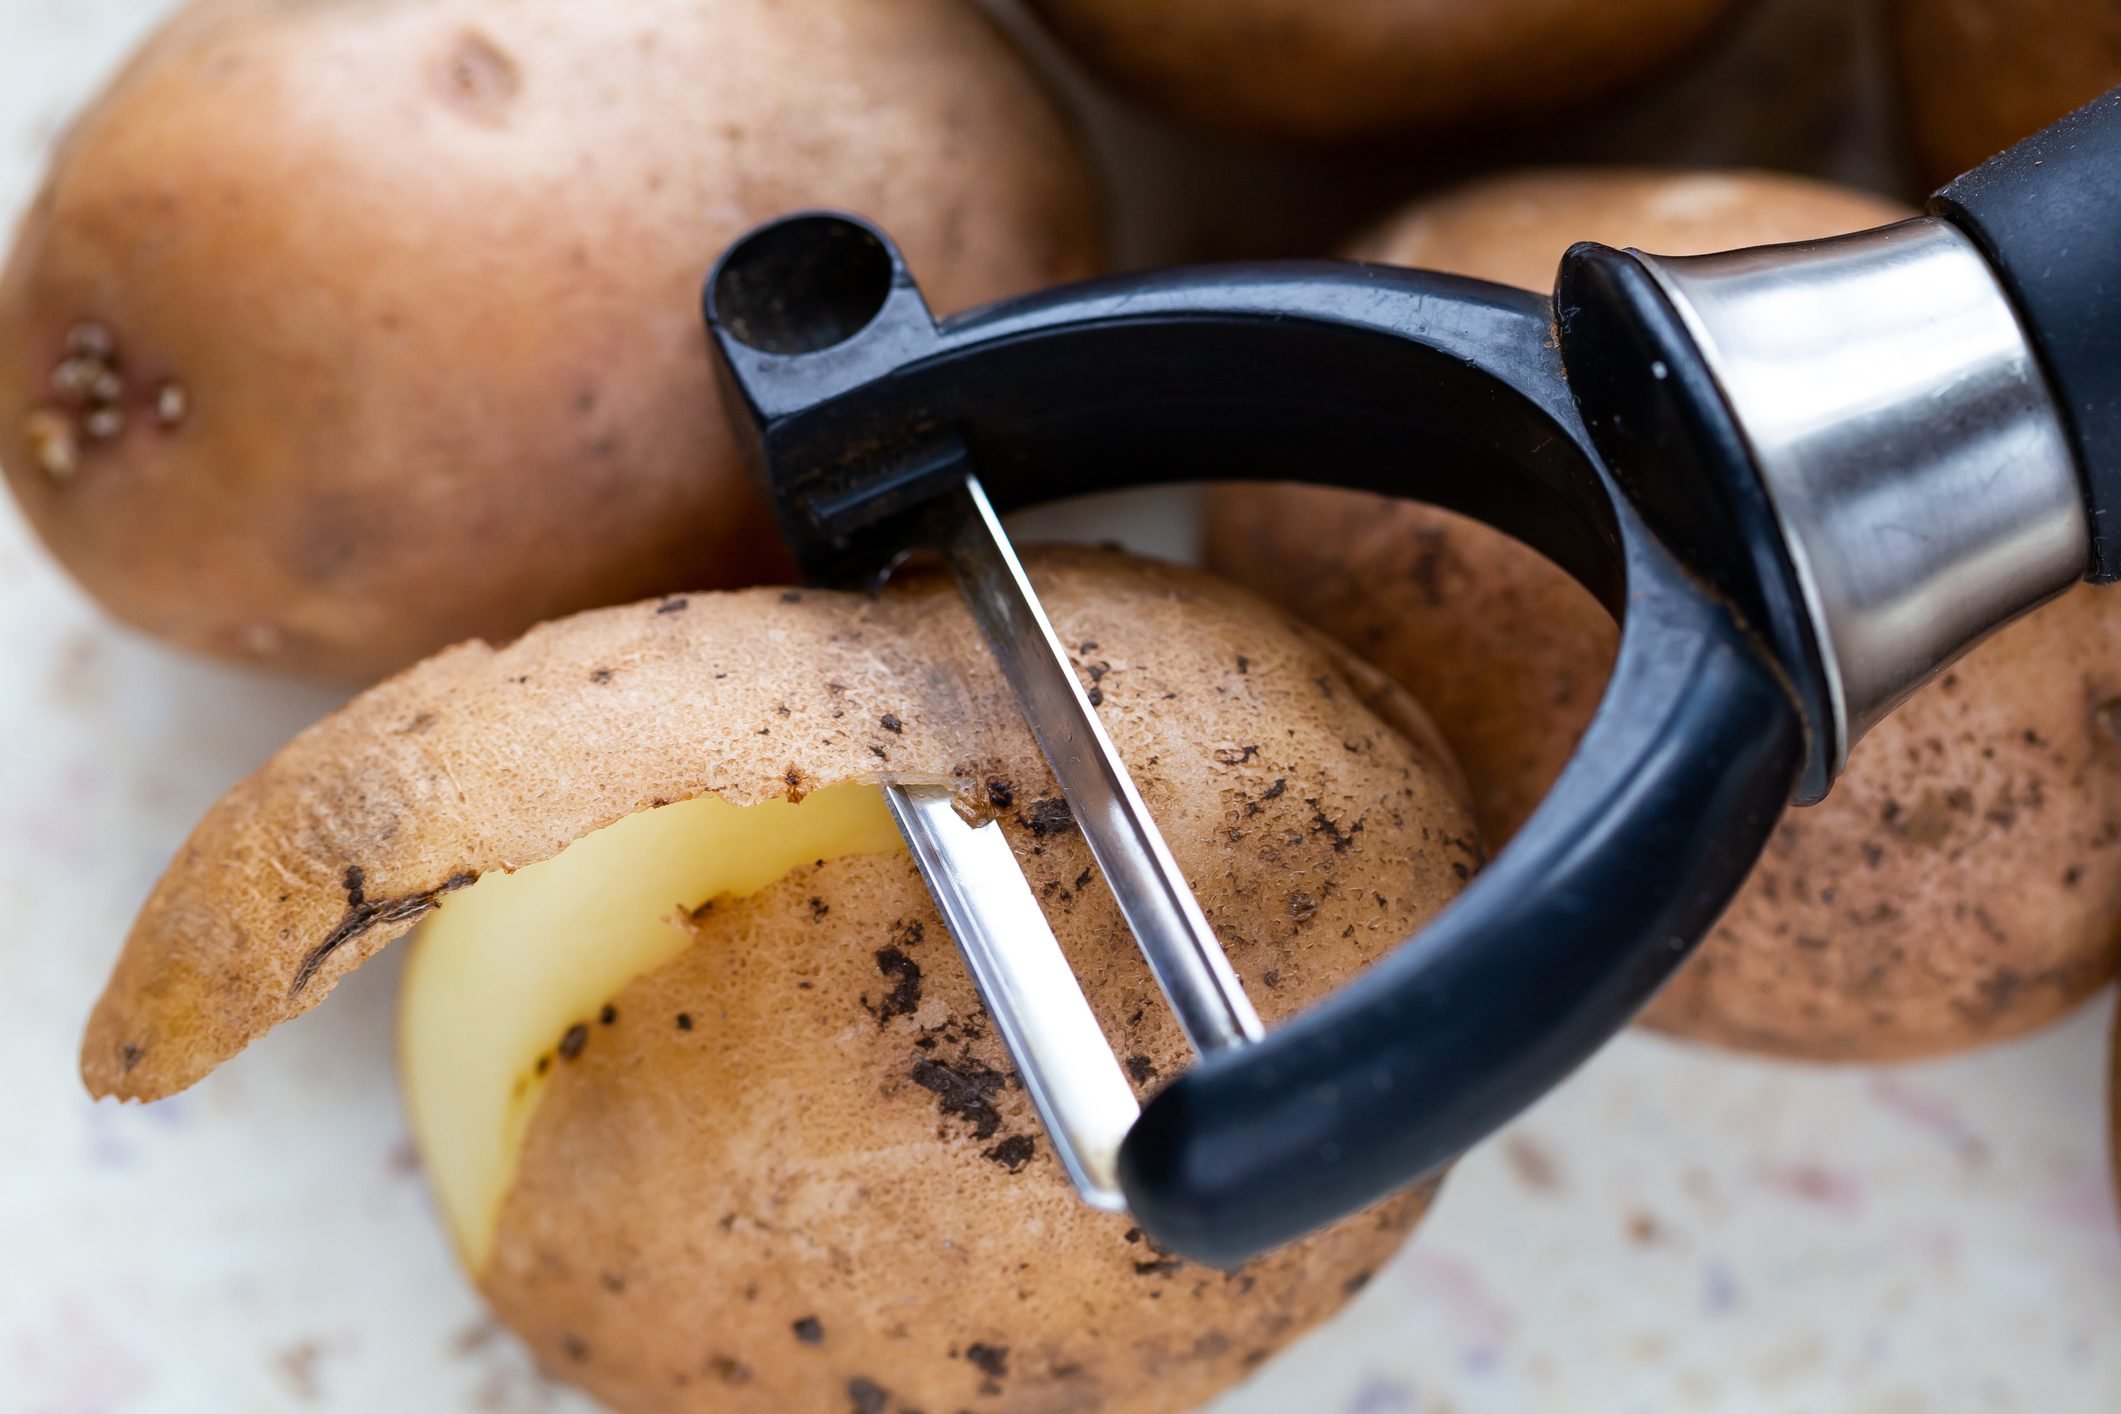 How to Use a Potato Peeler, According to a Professional Chef